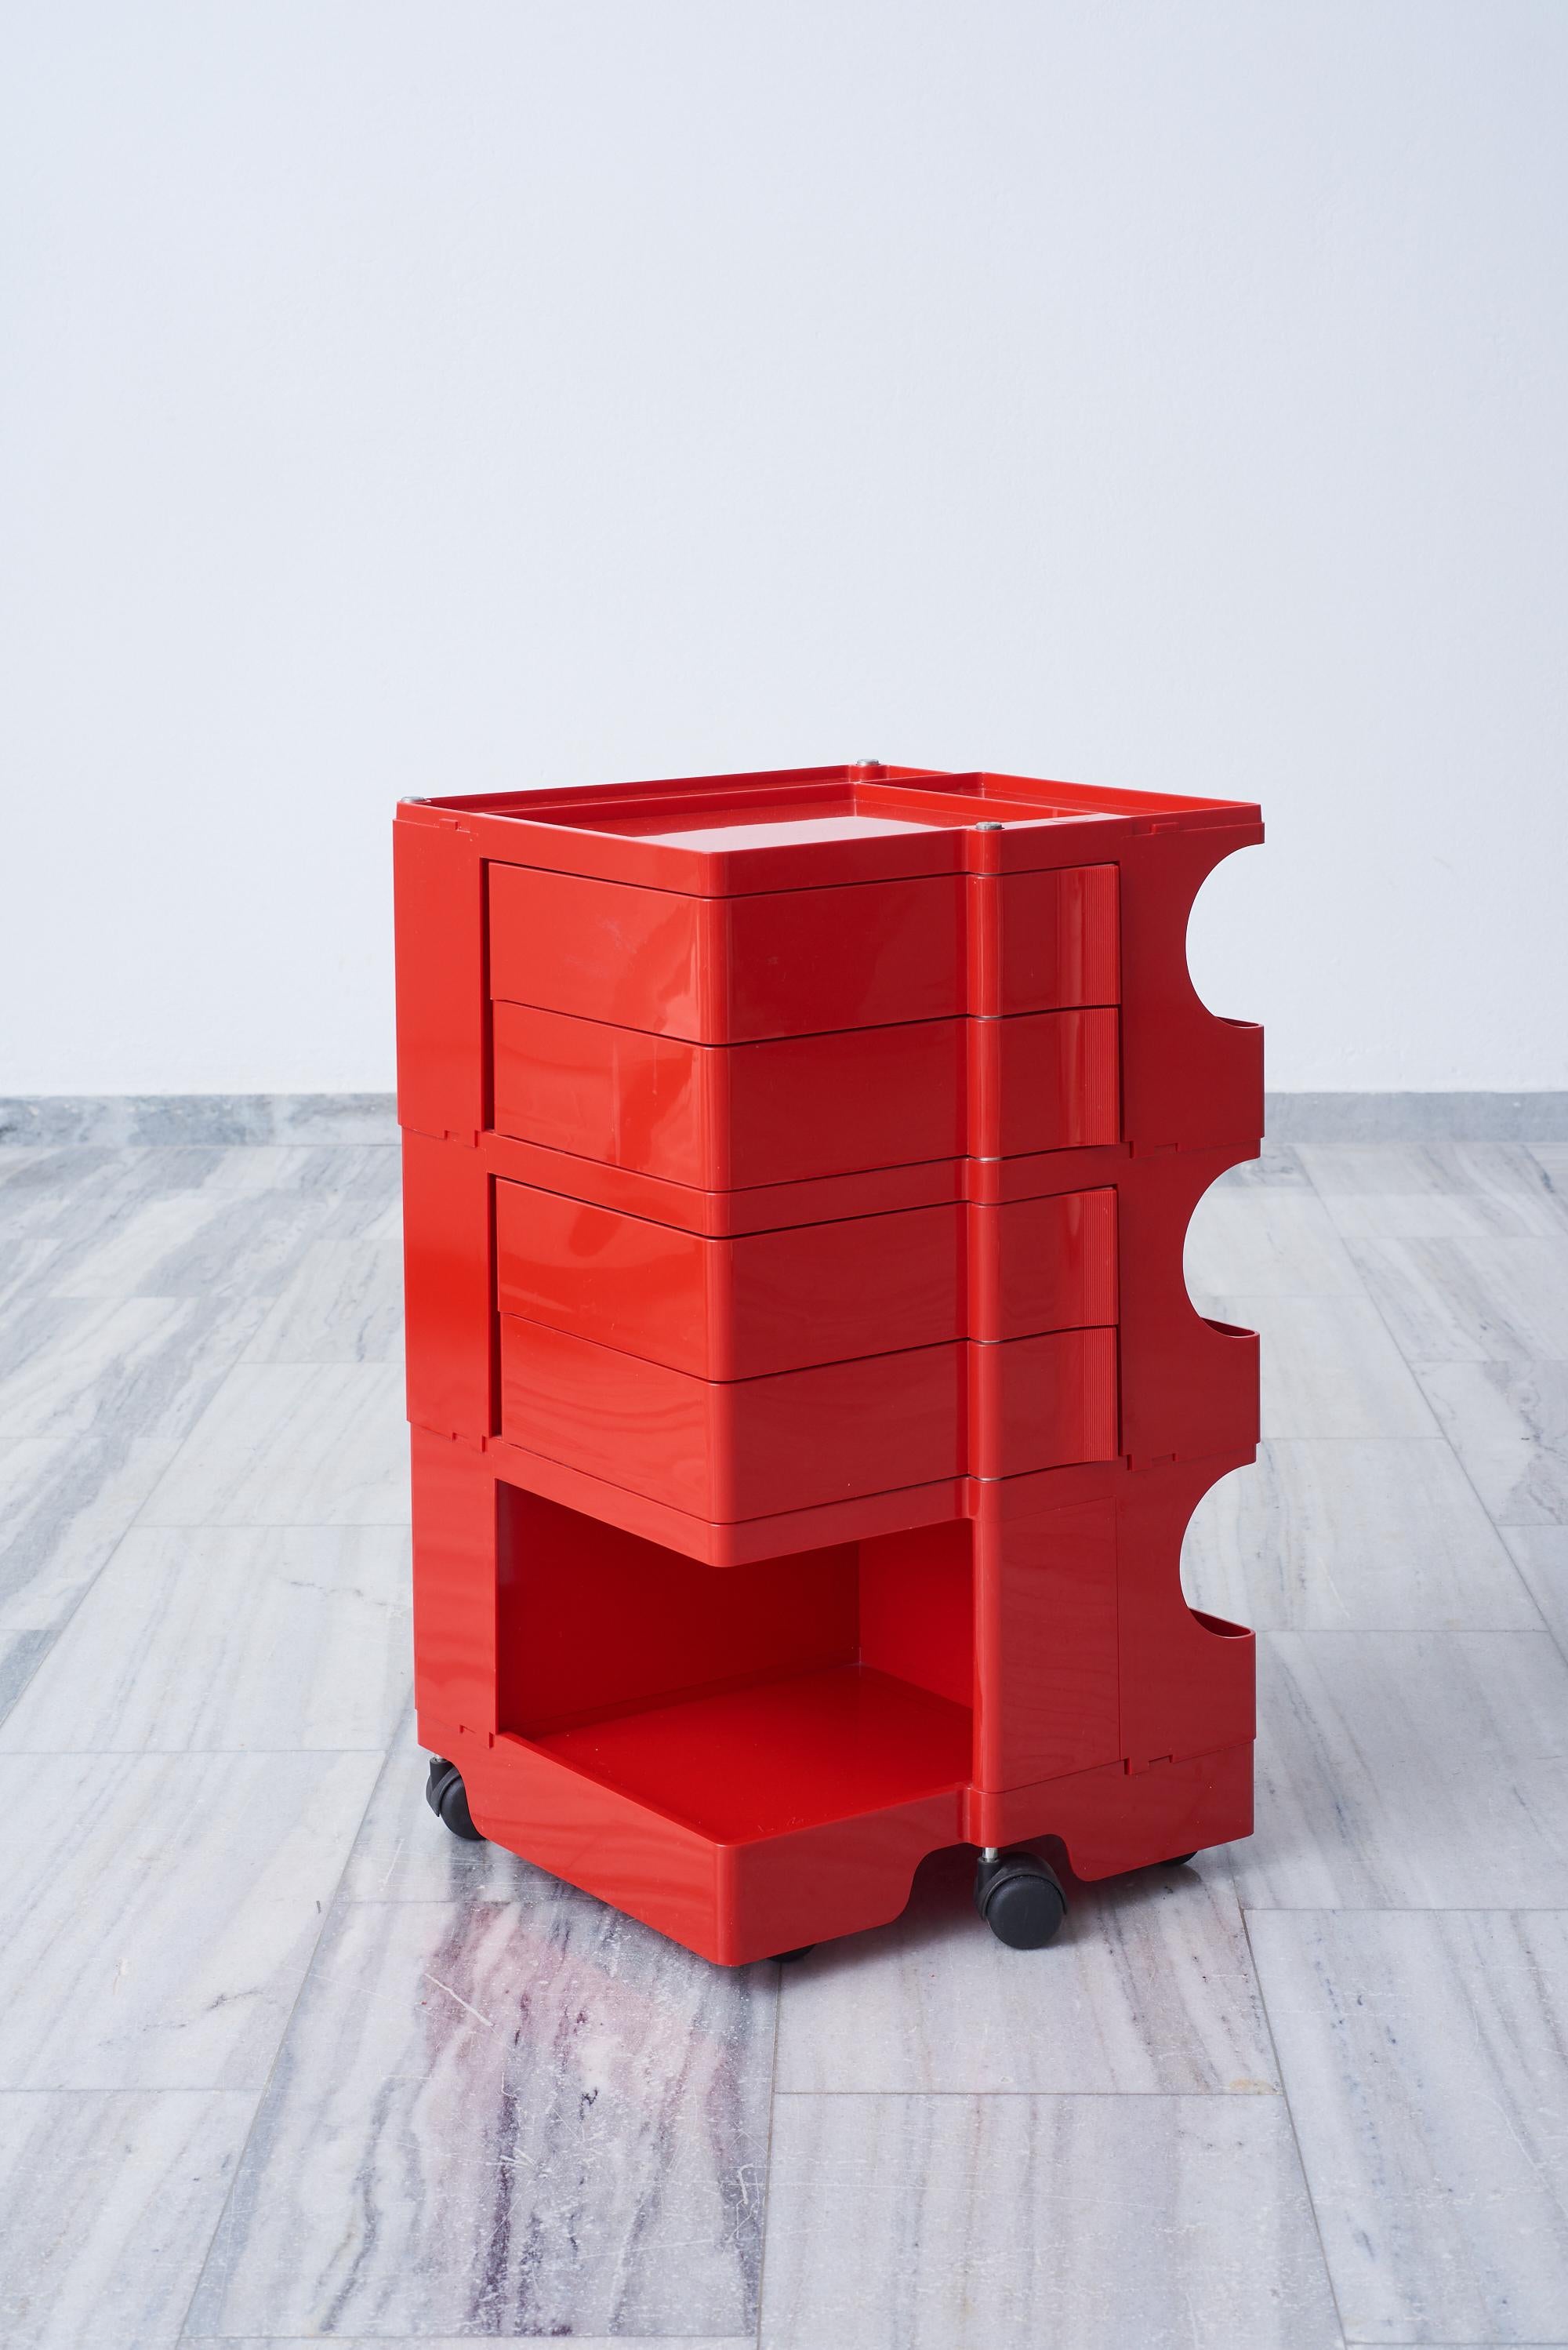 Red Boby Trolley 3.
This portable storage system was designed by Joe Colombo and produced by Bieffeplast in Padova, Italy in 1969.
In Colombo’s vision, people needed efficient living equipment that they could take with them in a society that was